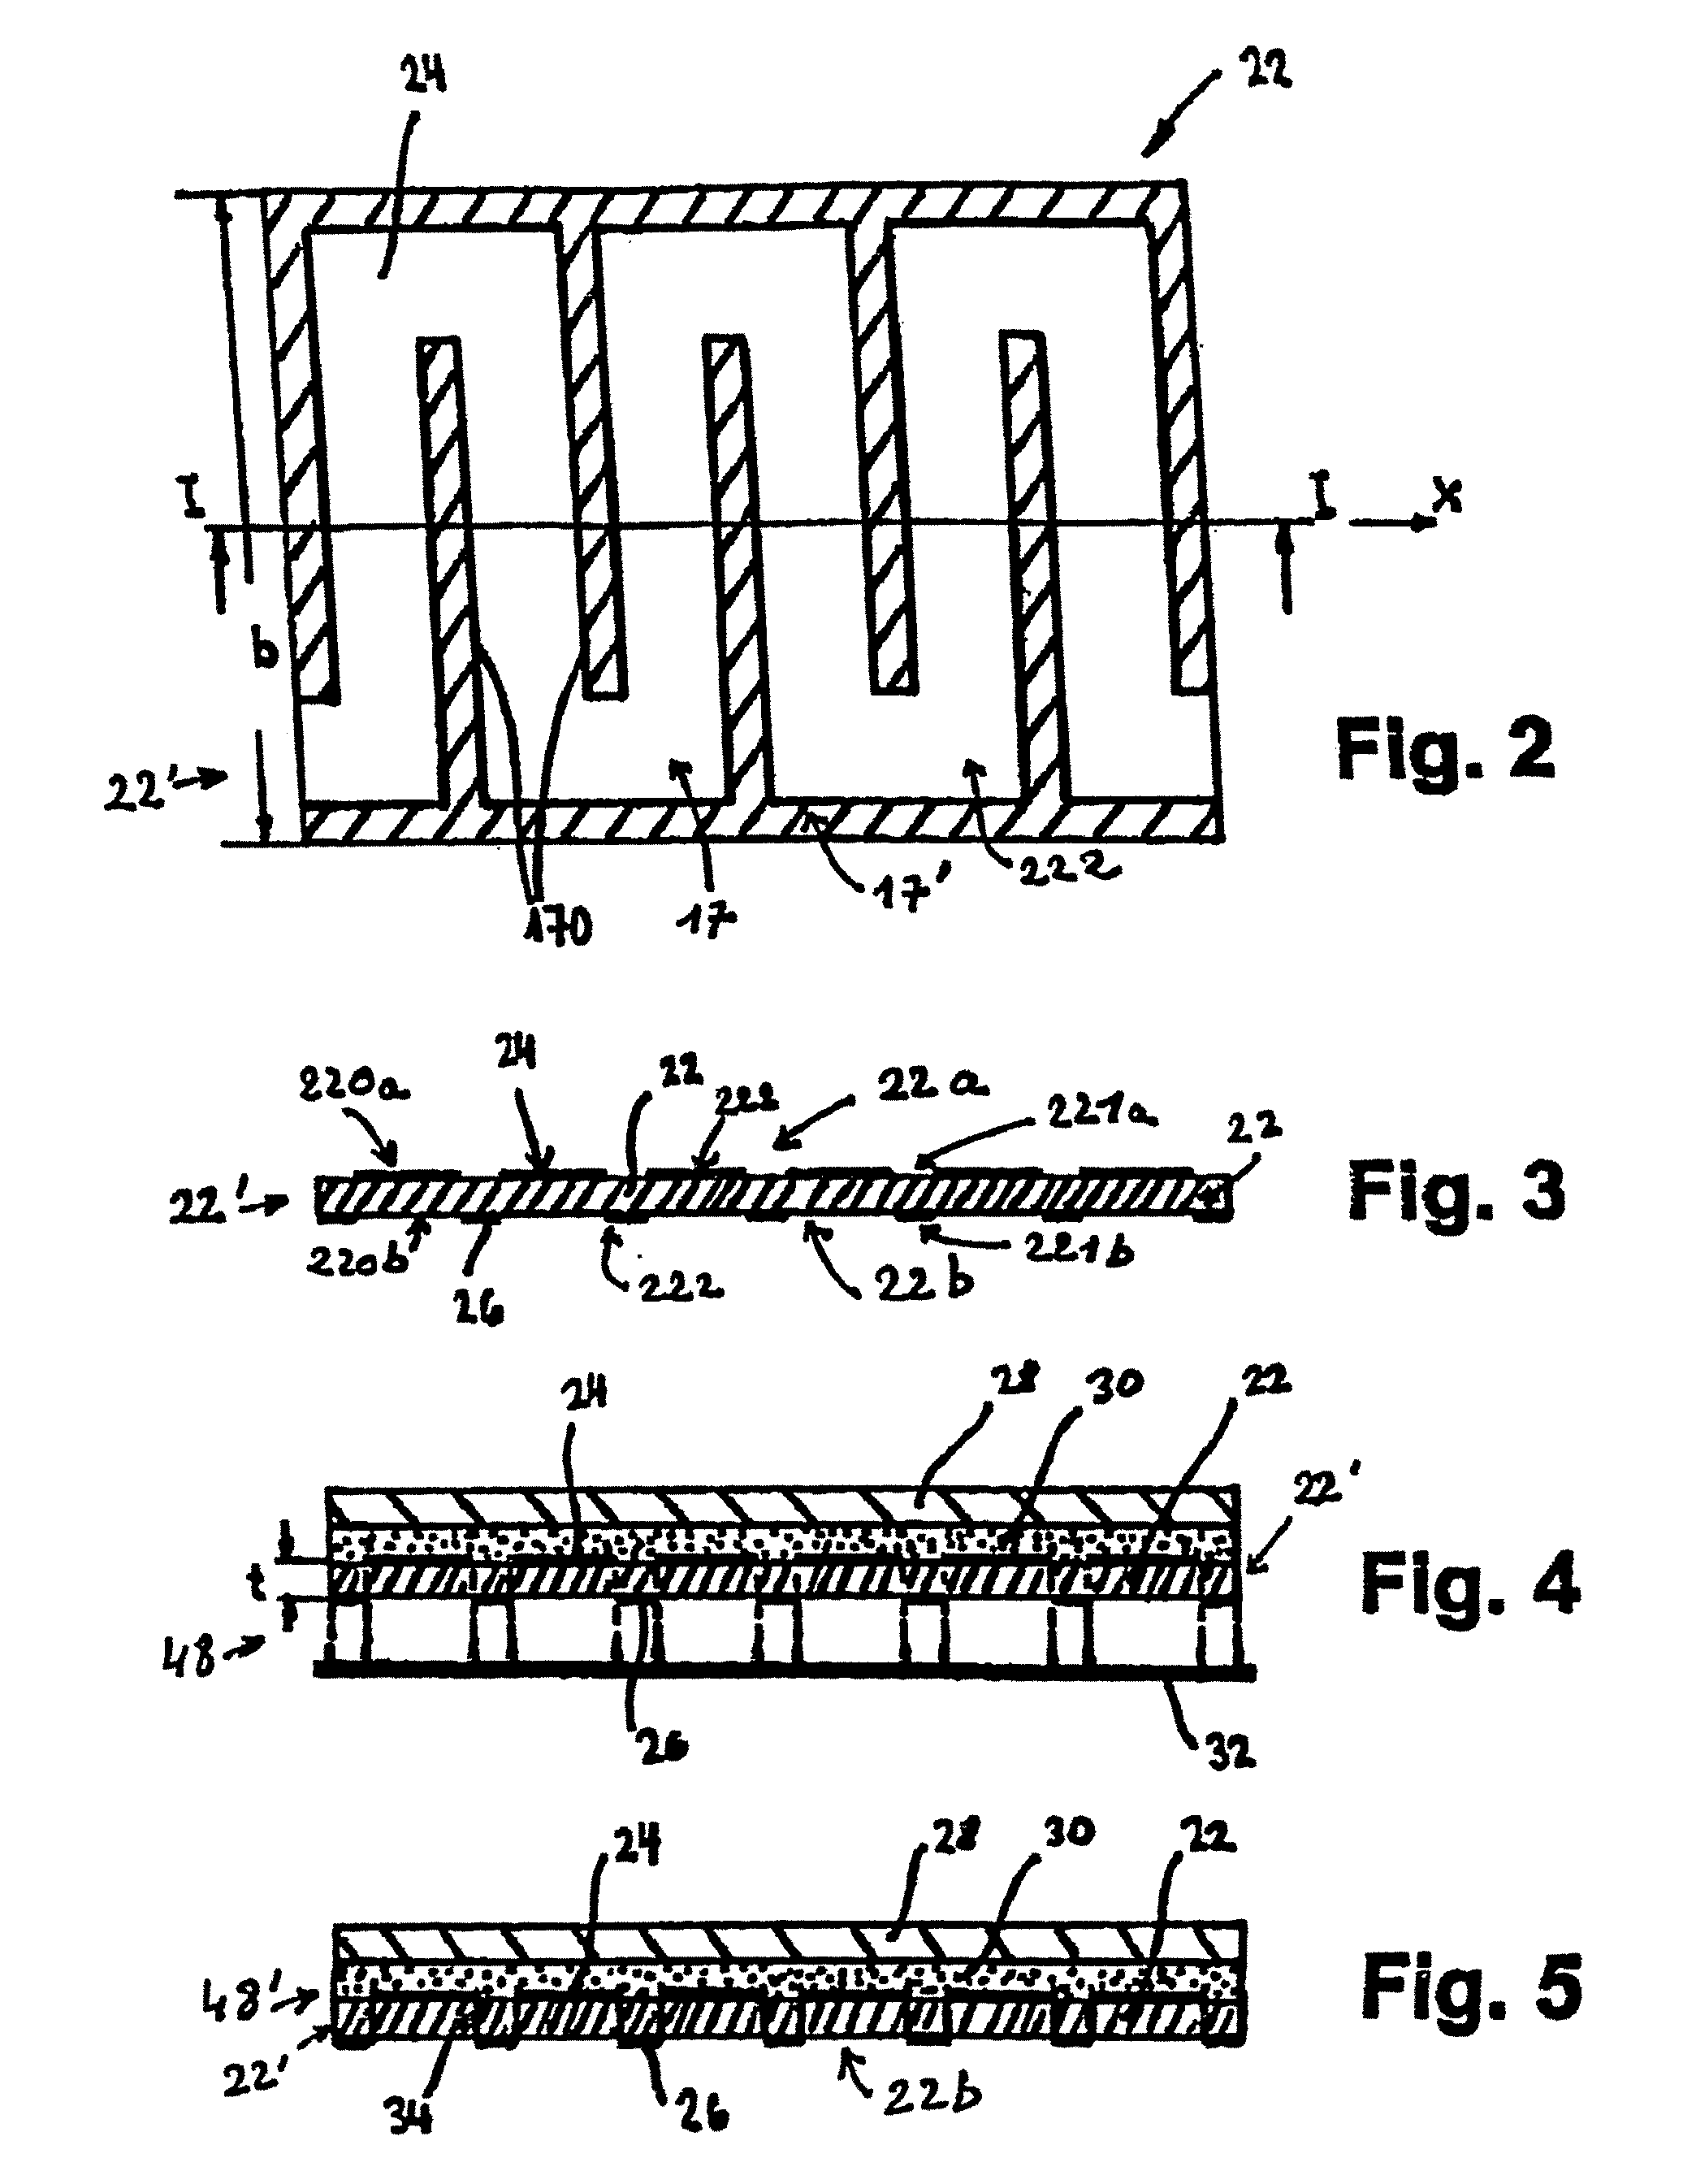 Process for Manufacturing a Heating Sheet